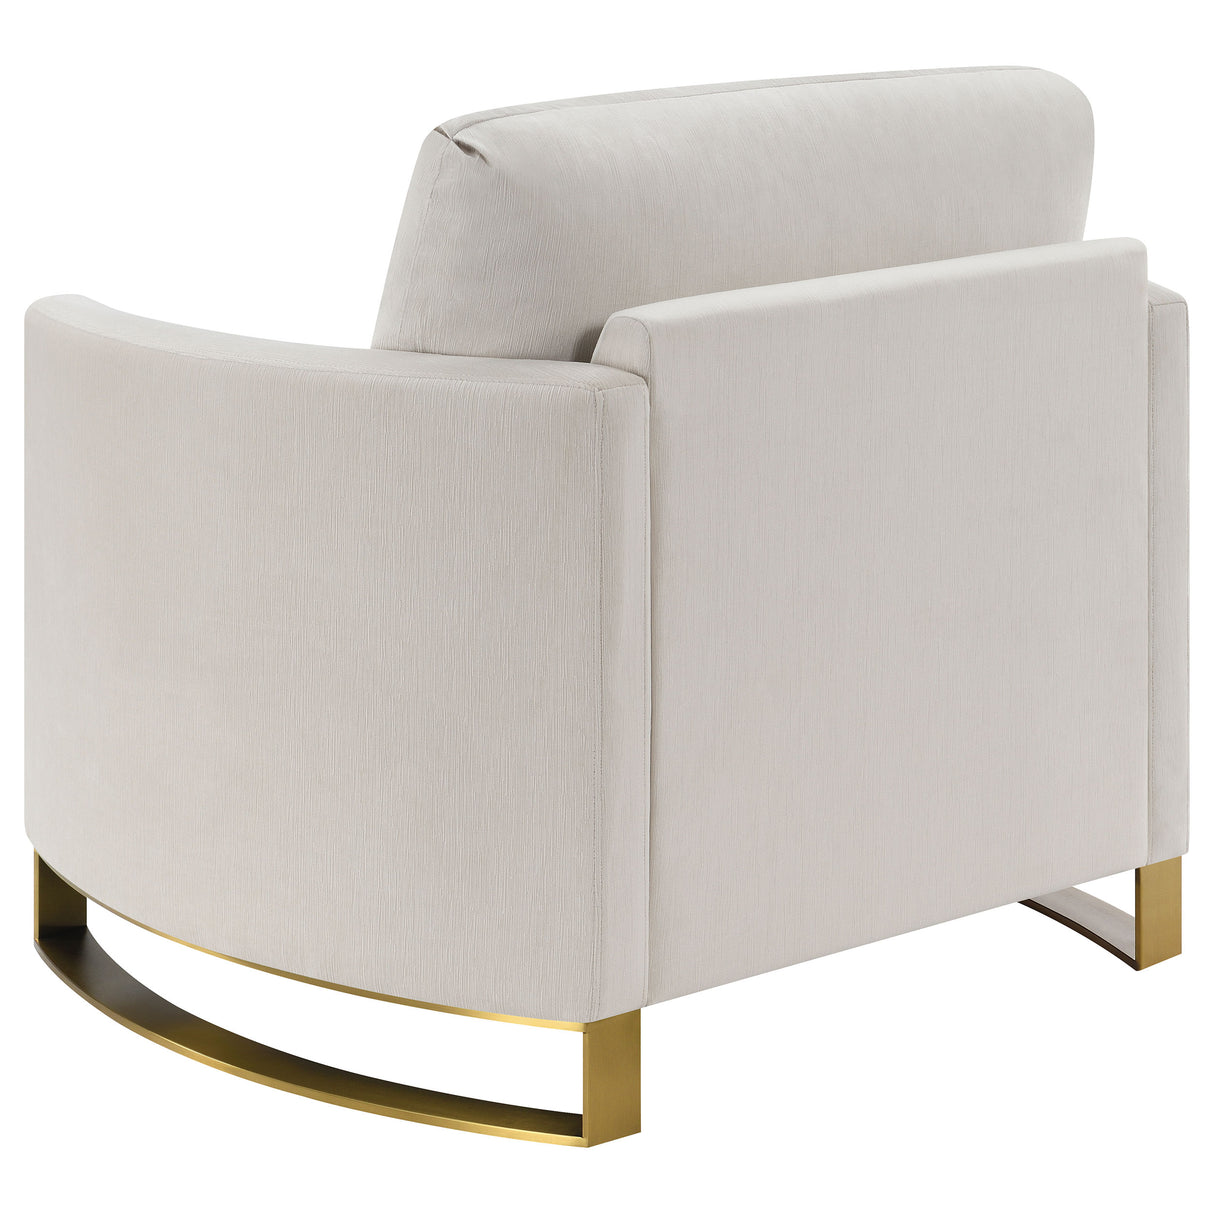 Chair - Corliss Upholstered Arched Arms Chair Beige